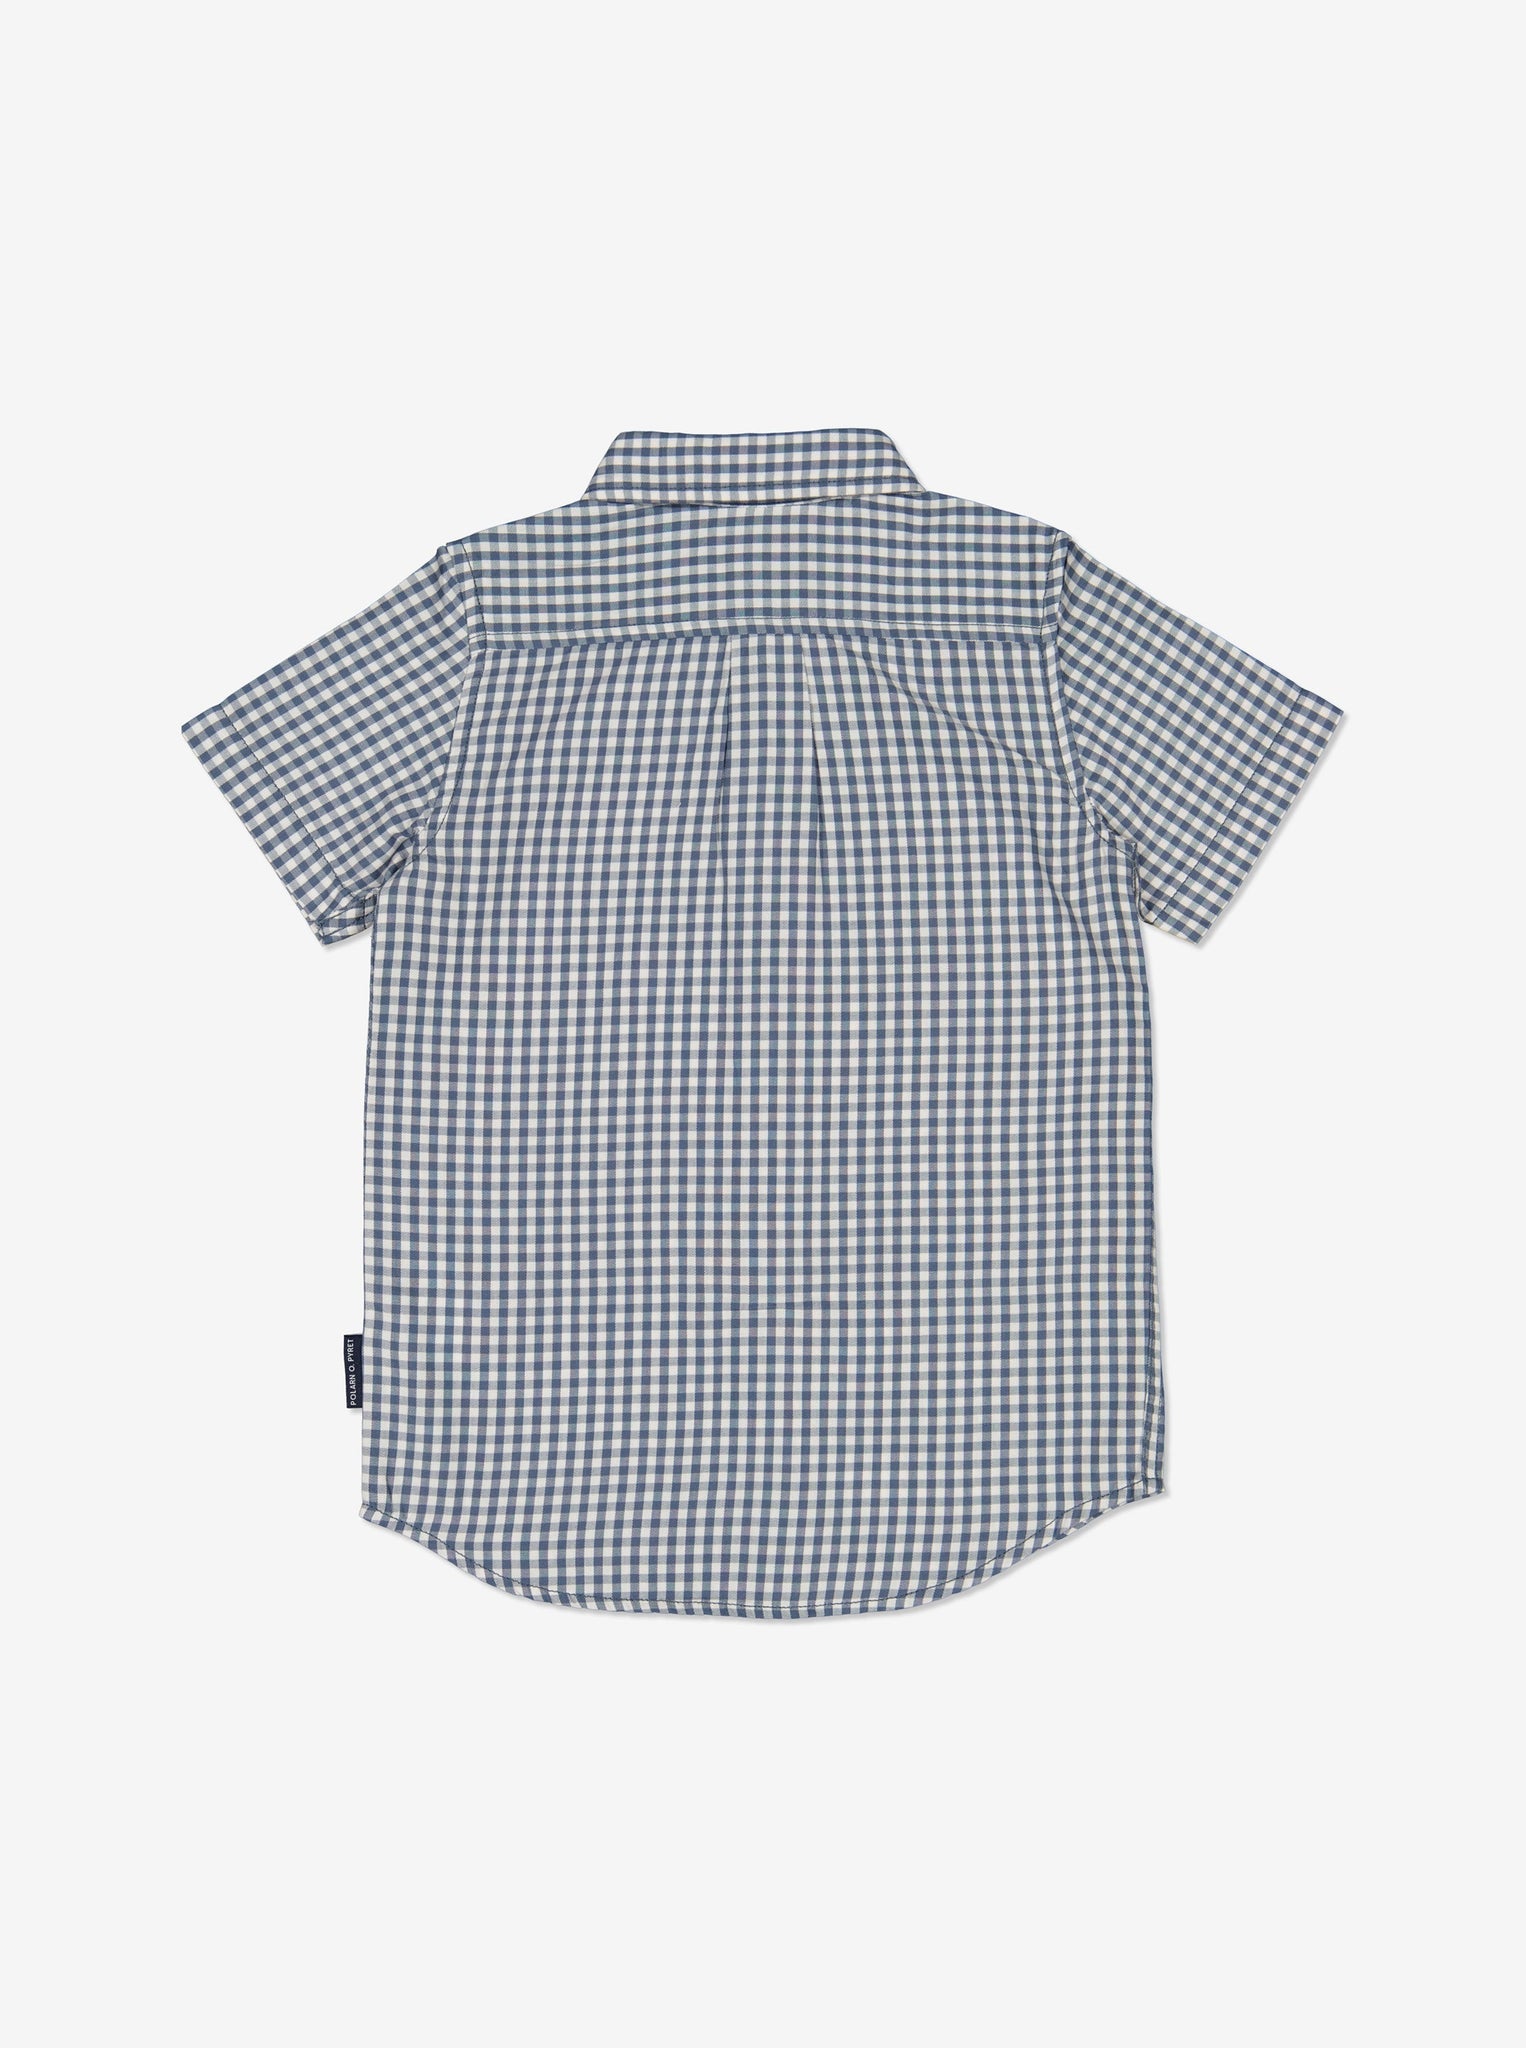 Blue Checked Boys Shirt from Polarn O. Pyret Kidswear. Made from 100% GOTS Organic Cotton.